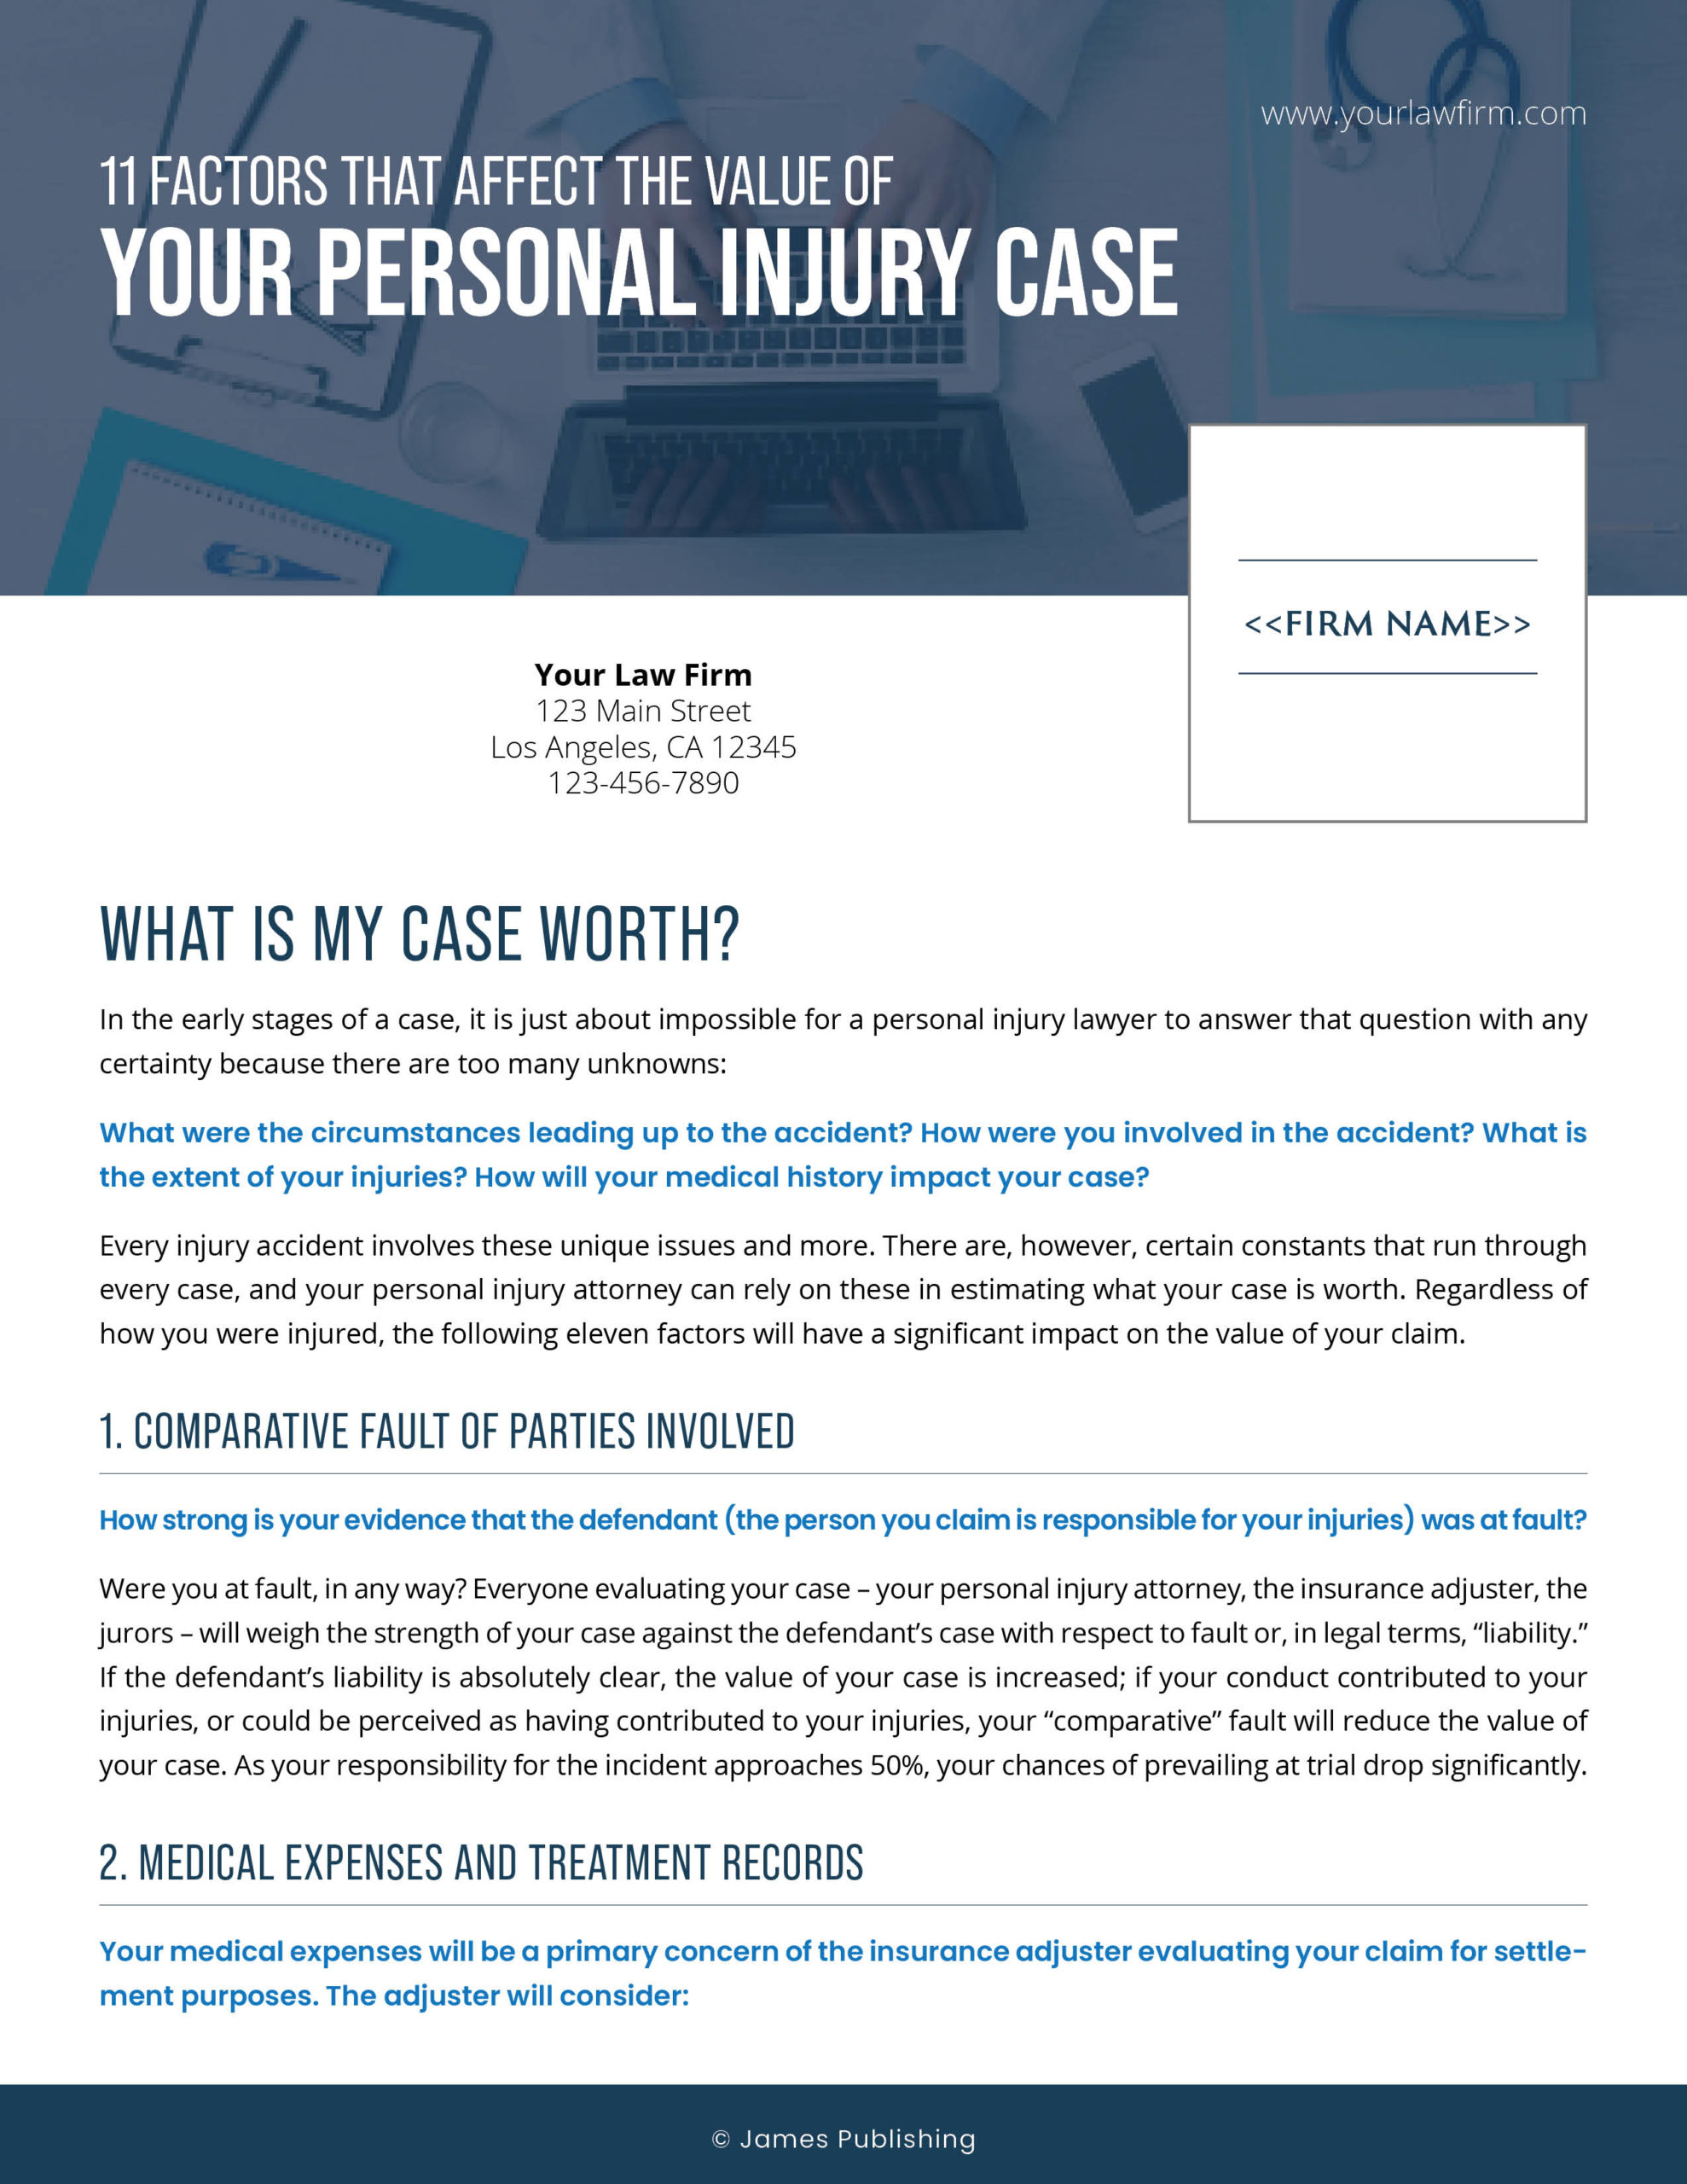 PI-03 11 Factors that Impact the Value of Your Personal Injury Case